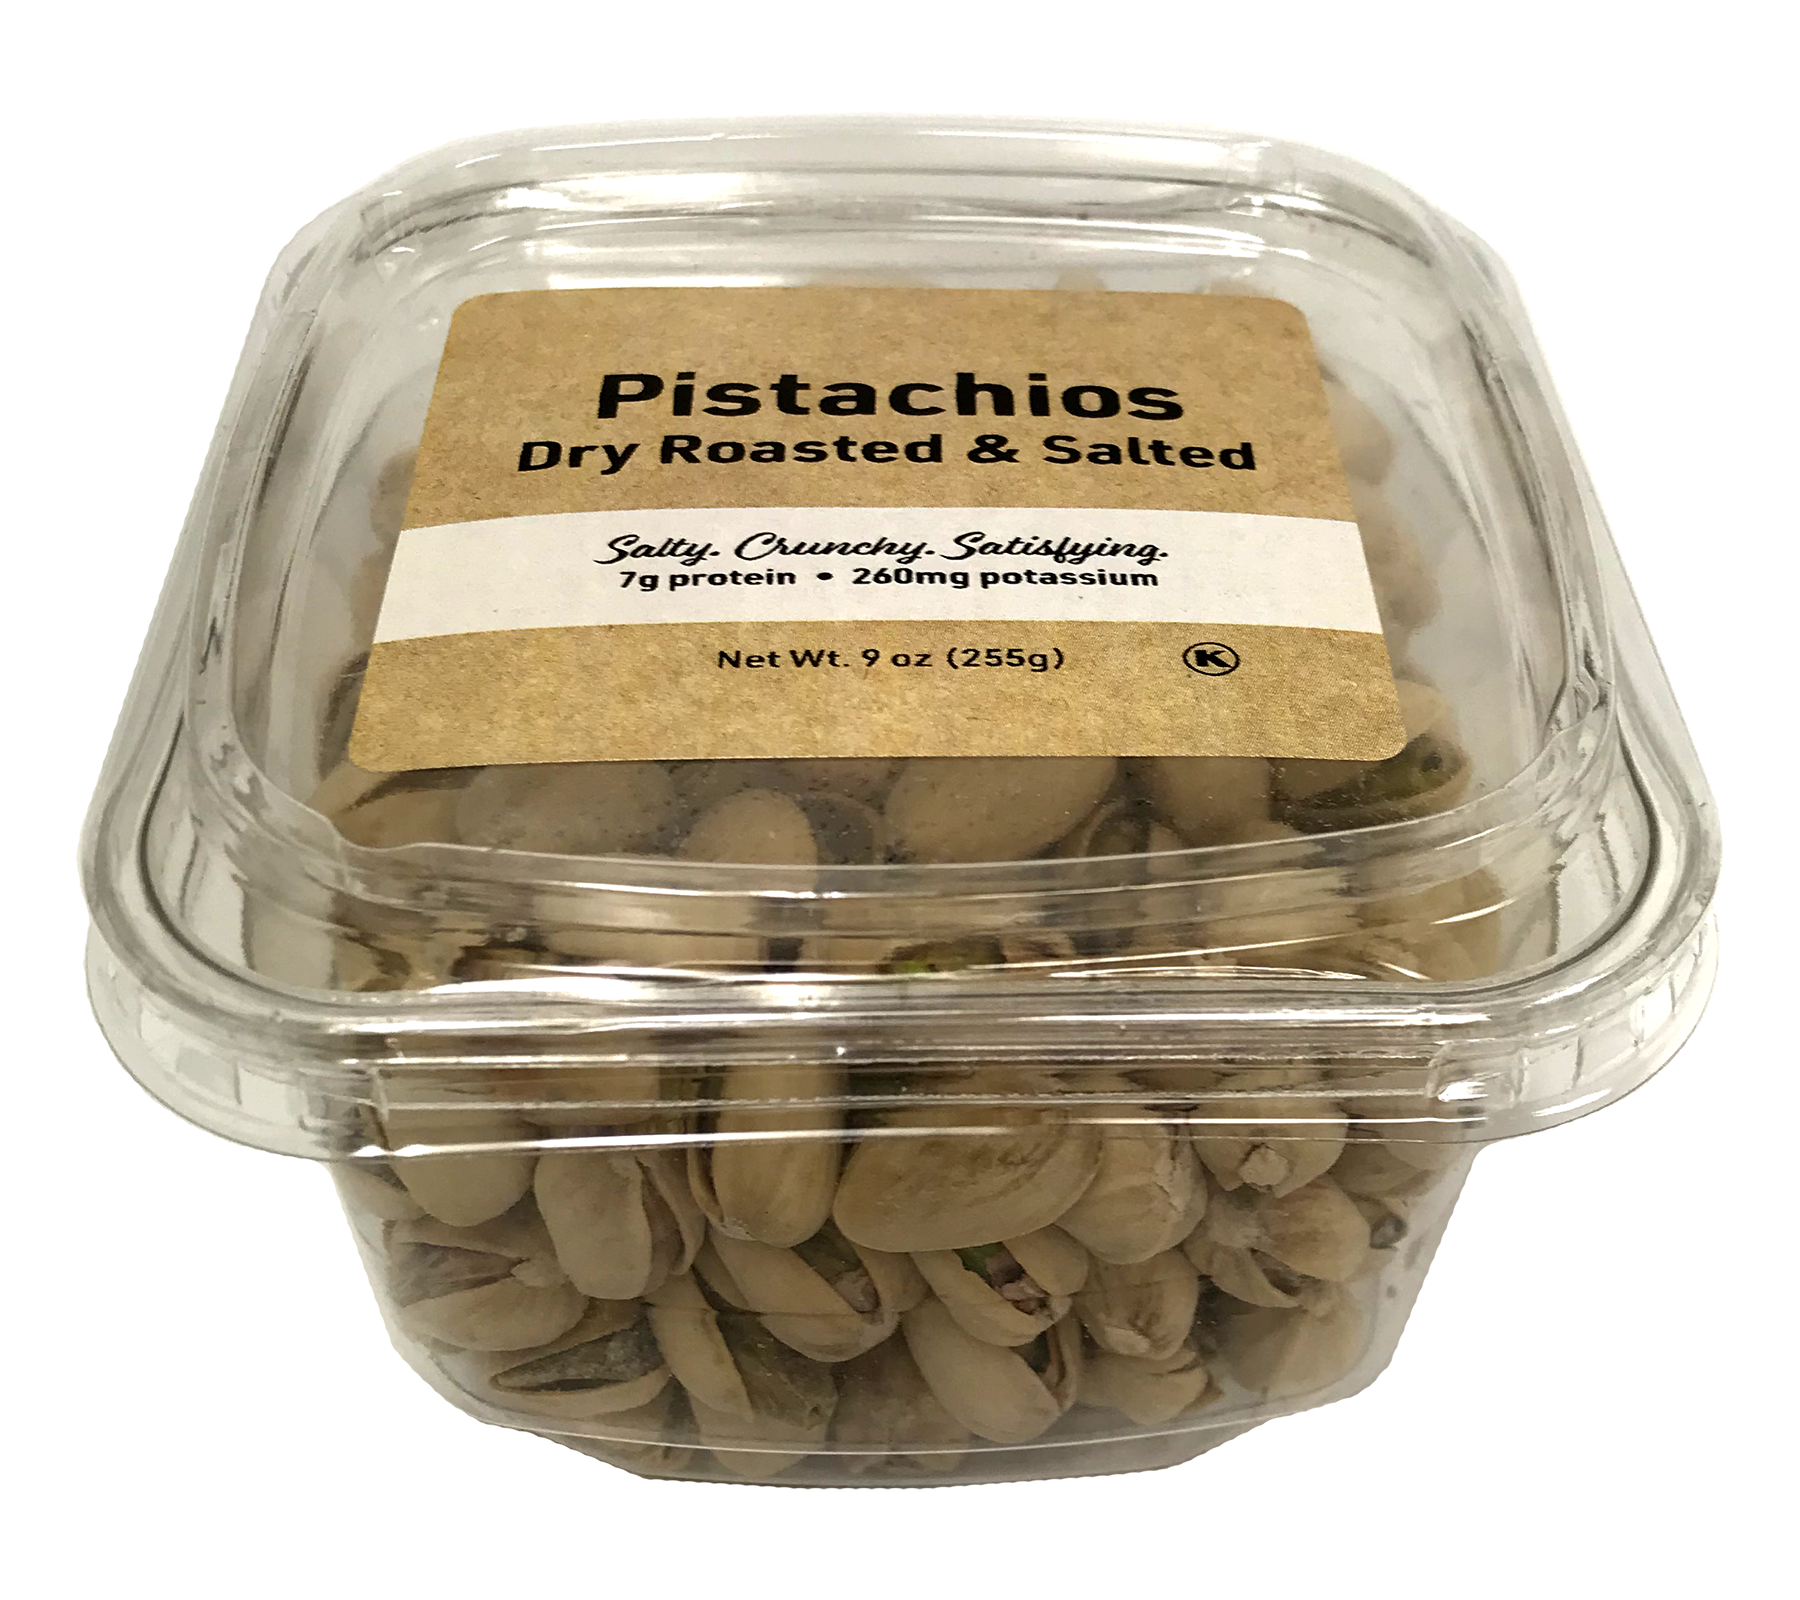 Pistachios dry roasted and salted 9 oz tub